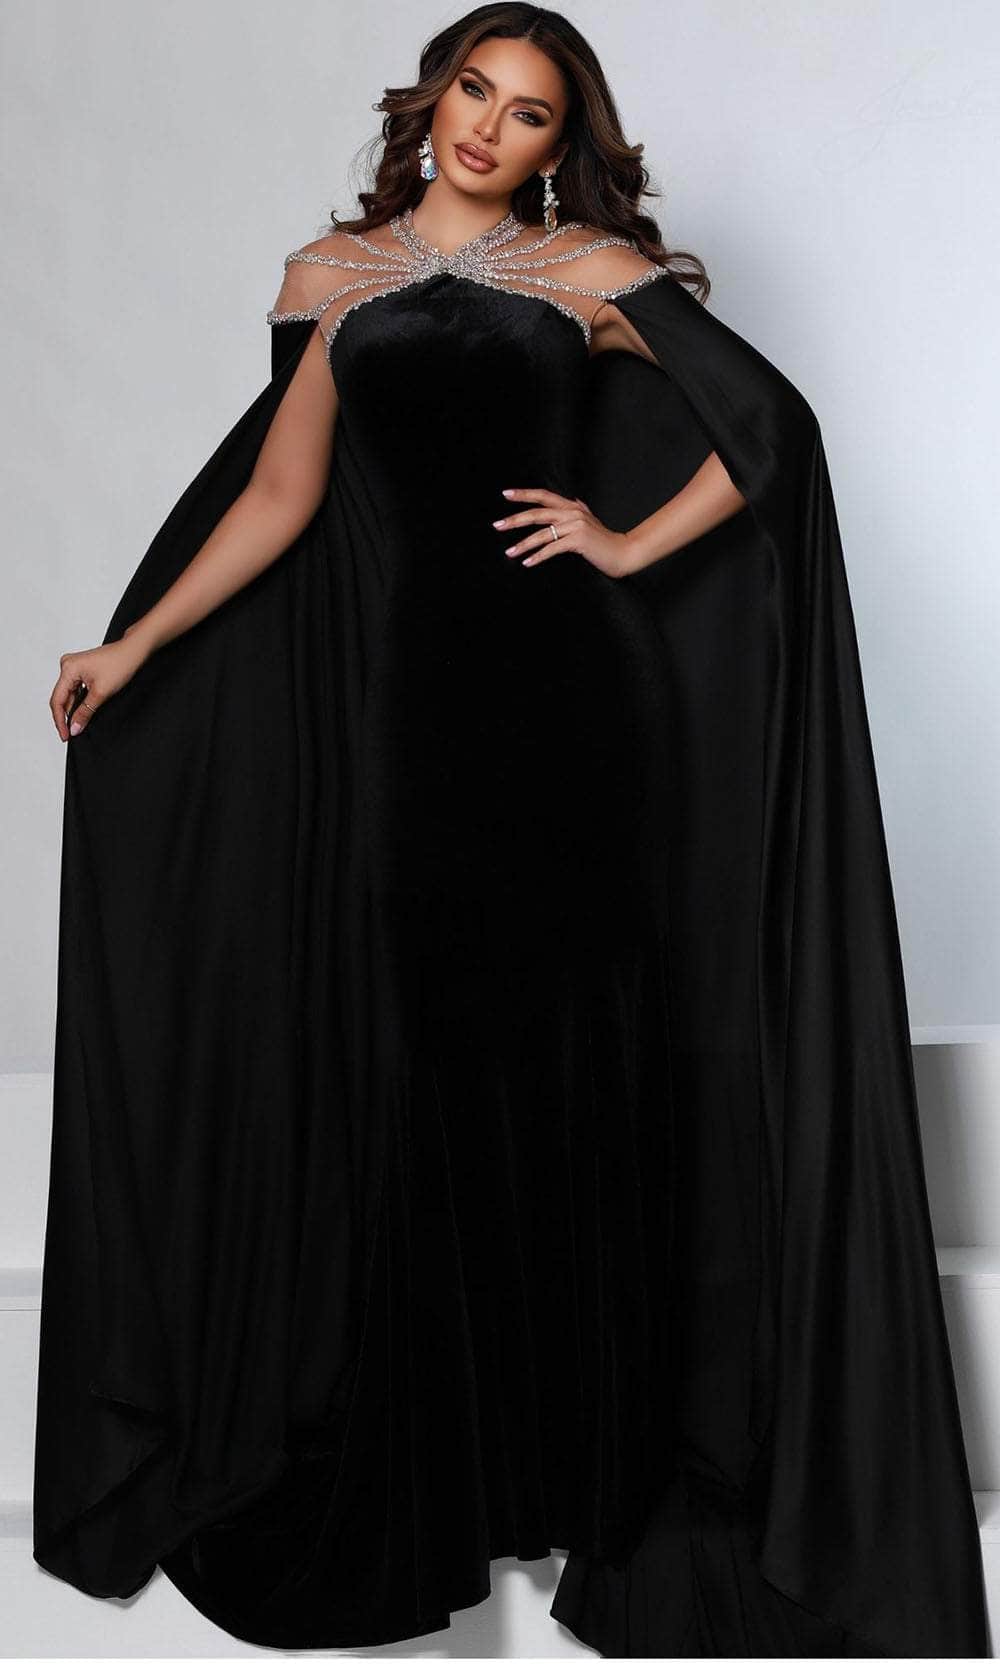 Black Evening Cape Gown for Girls| Sustainable Luxury | Vegan | Buy Now